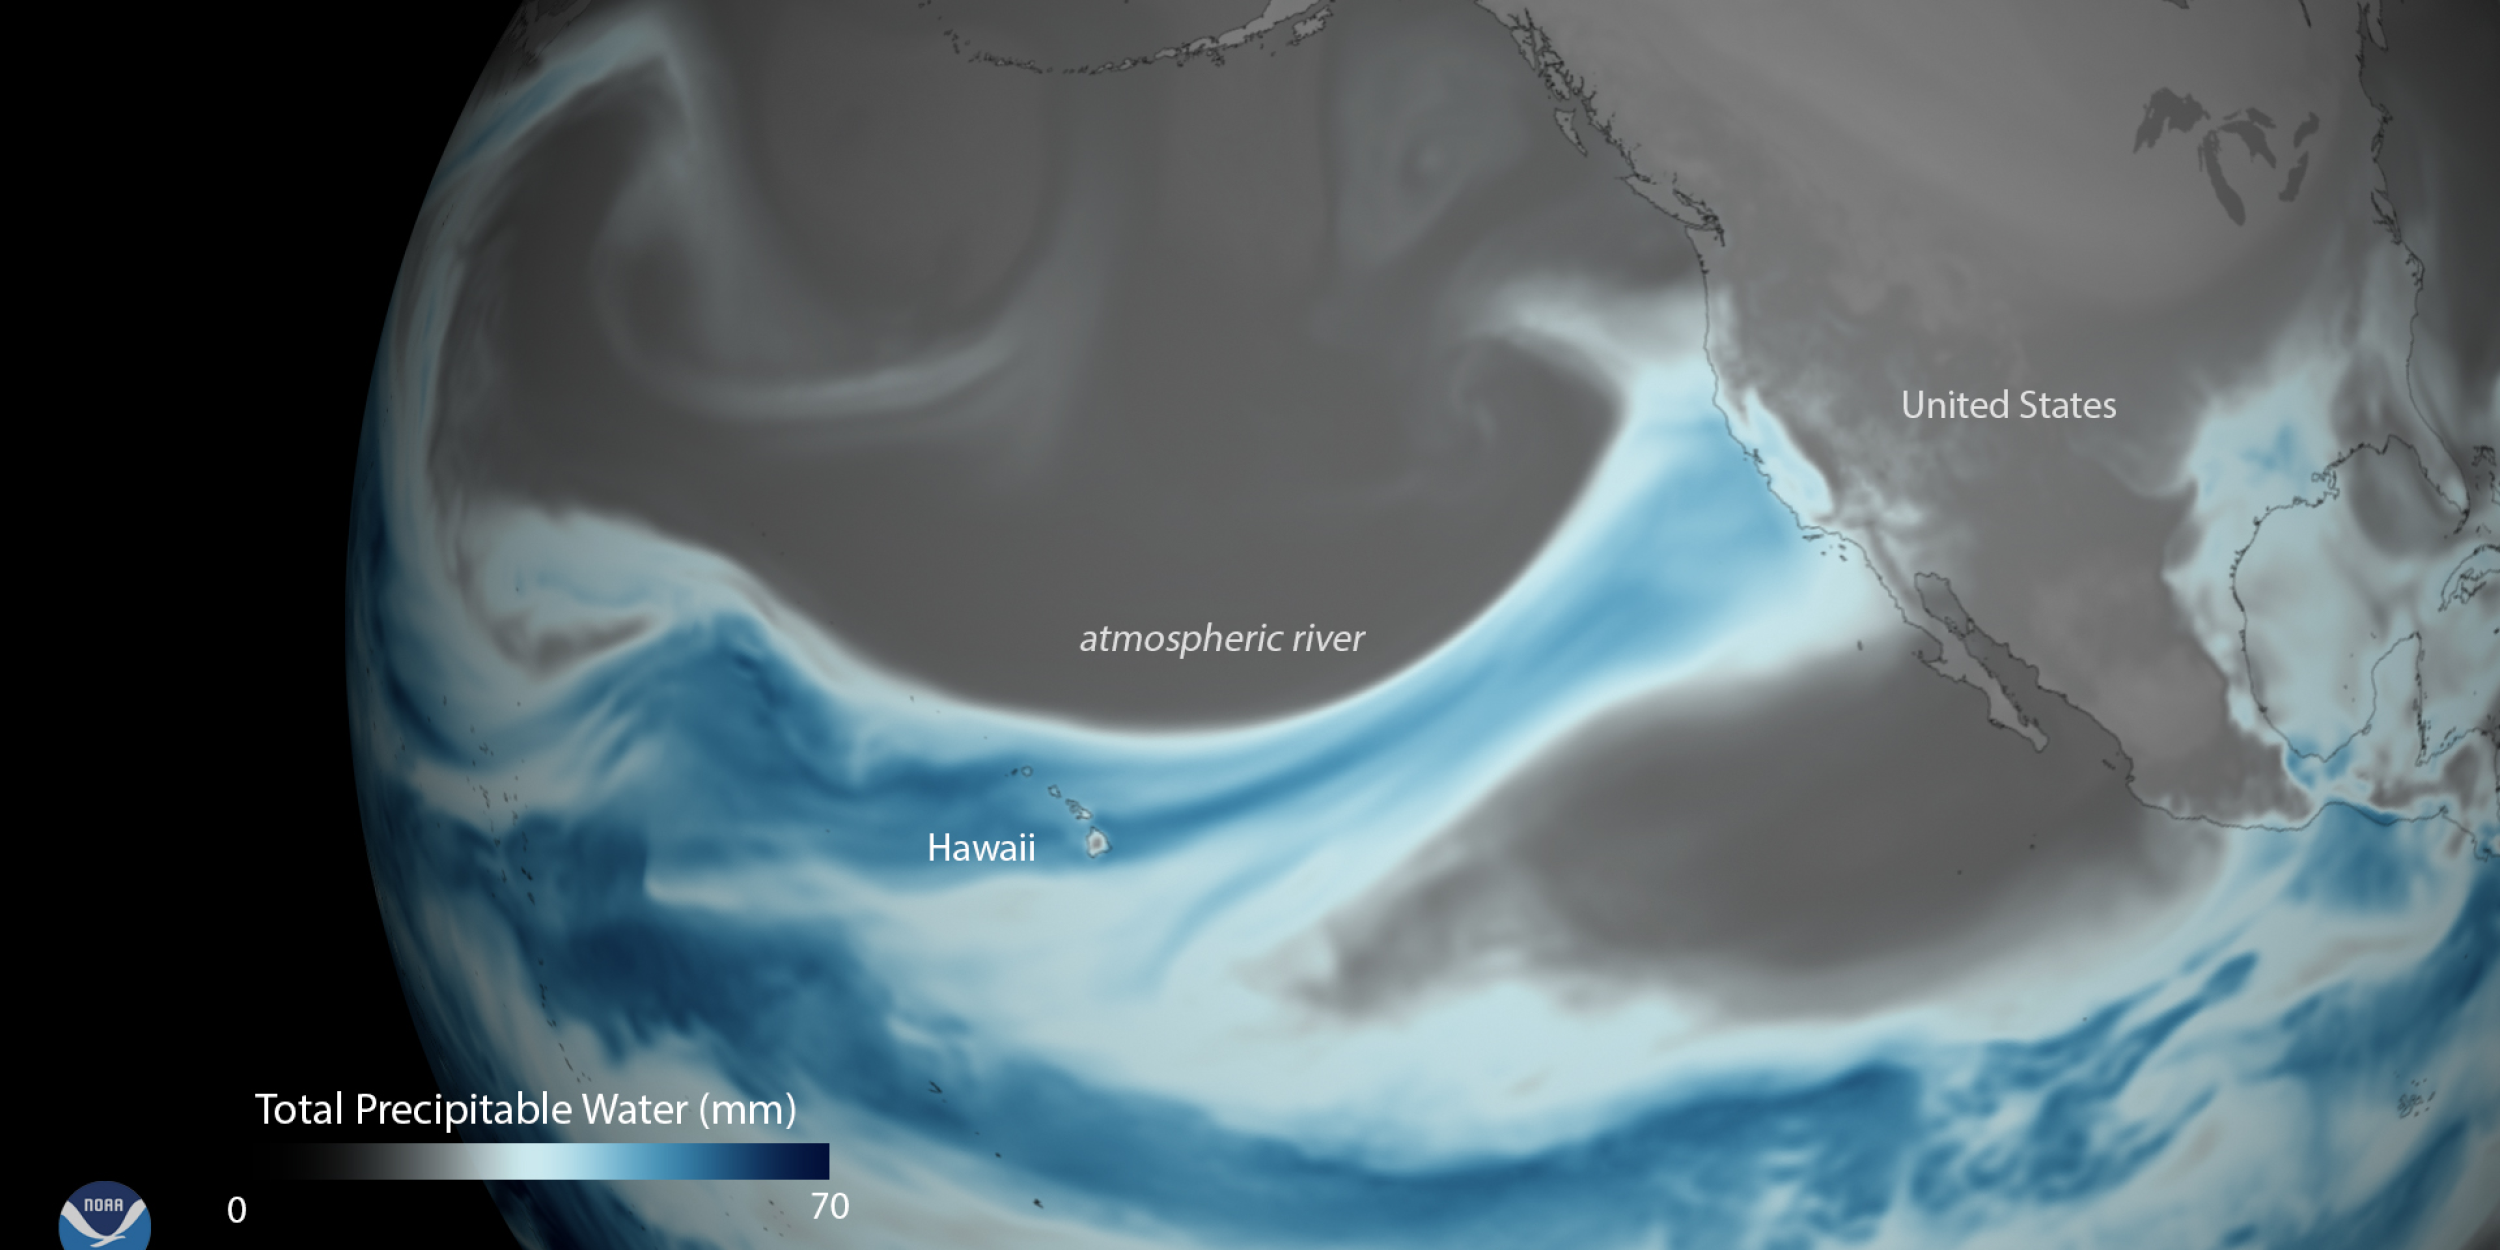 Carrying condensed tropical moisture, atmospheric rivers are responsible for transporting moisture thousands of miles and providing up to 50% of West Coast precipitation in certain locations. 